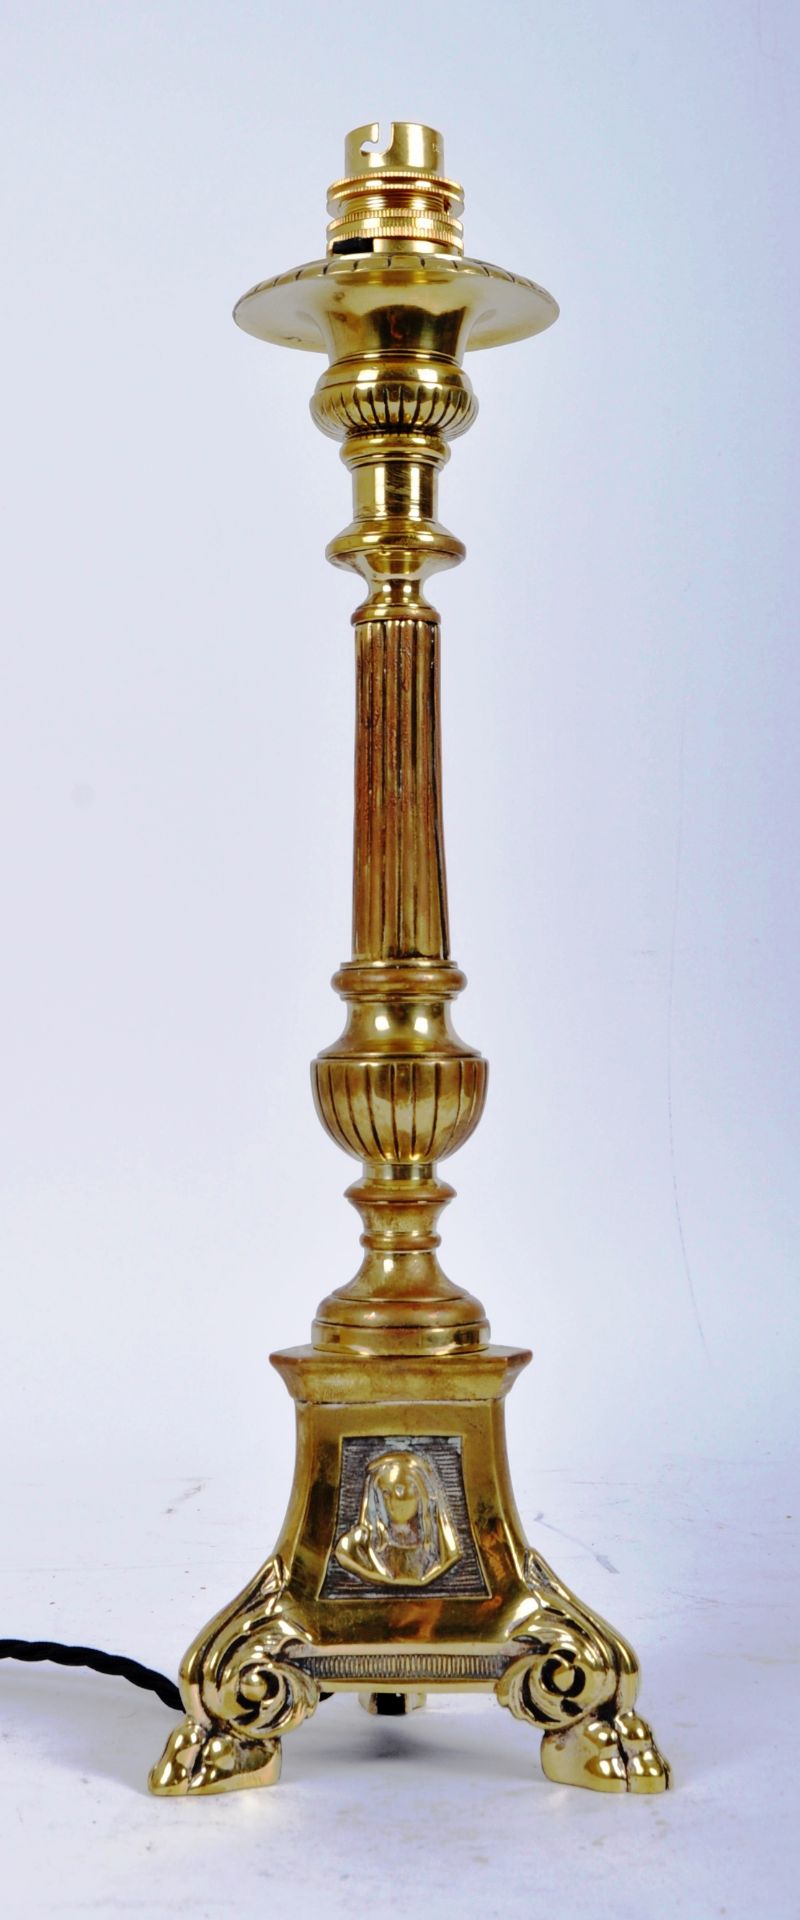 EARLY 20TH CENTURY POLISHED BRASS REEDED COLUMN LAMP - Image 2 of 6